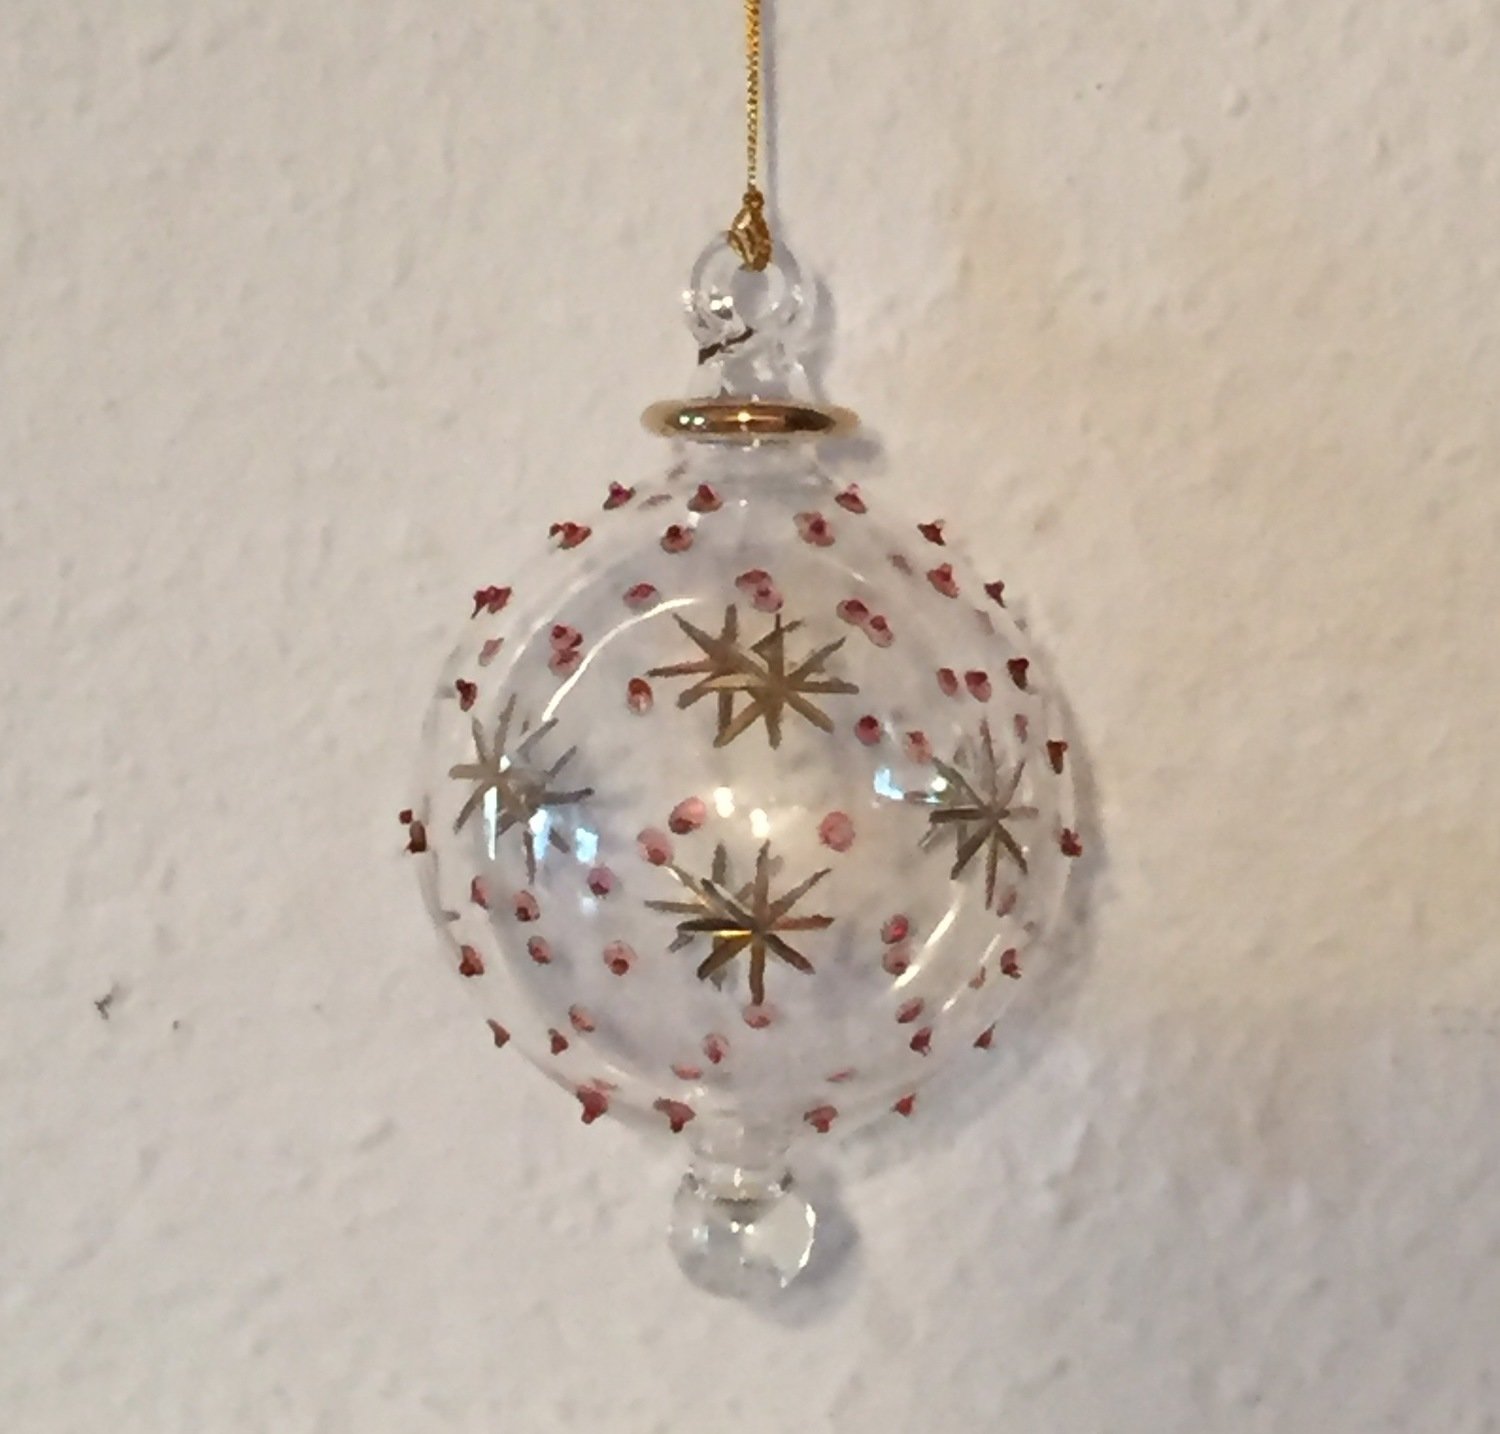 Glass Ball with Stars & Red Dots